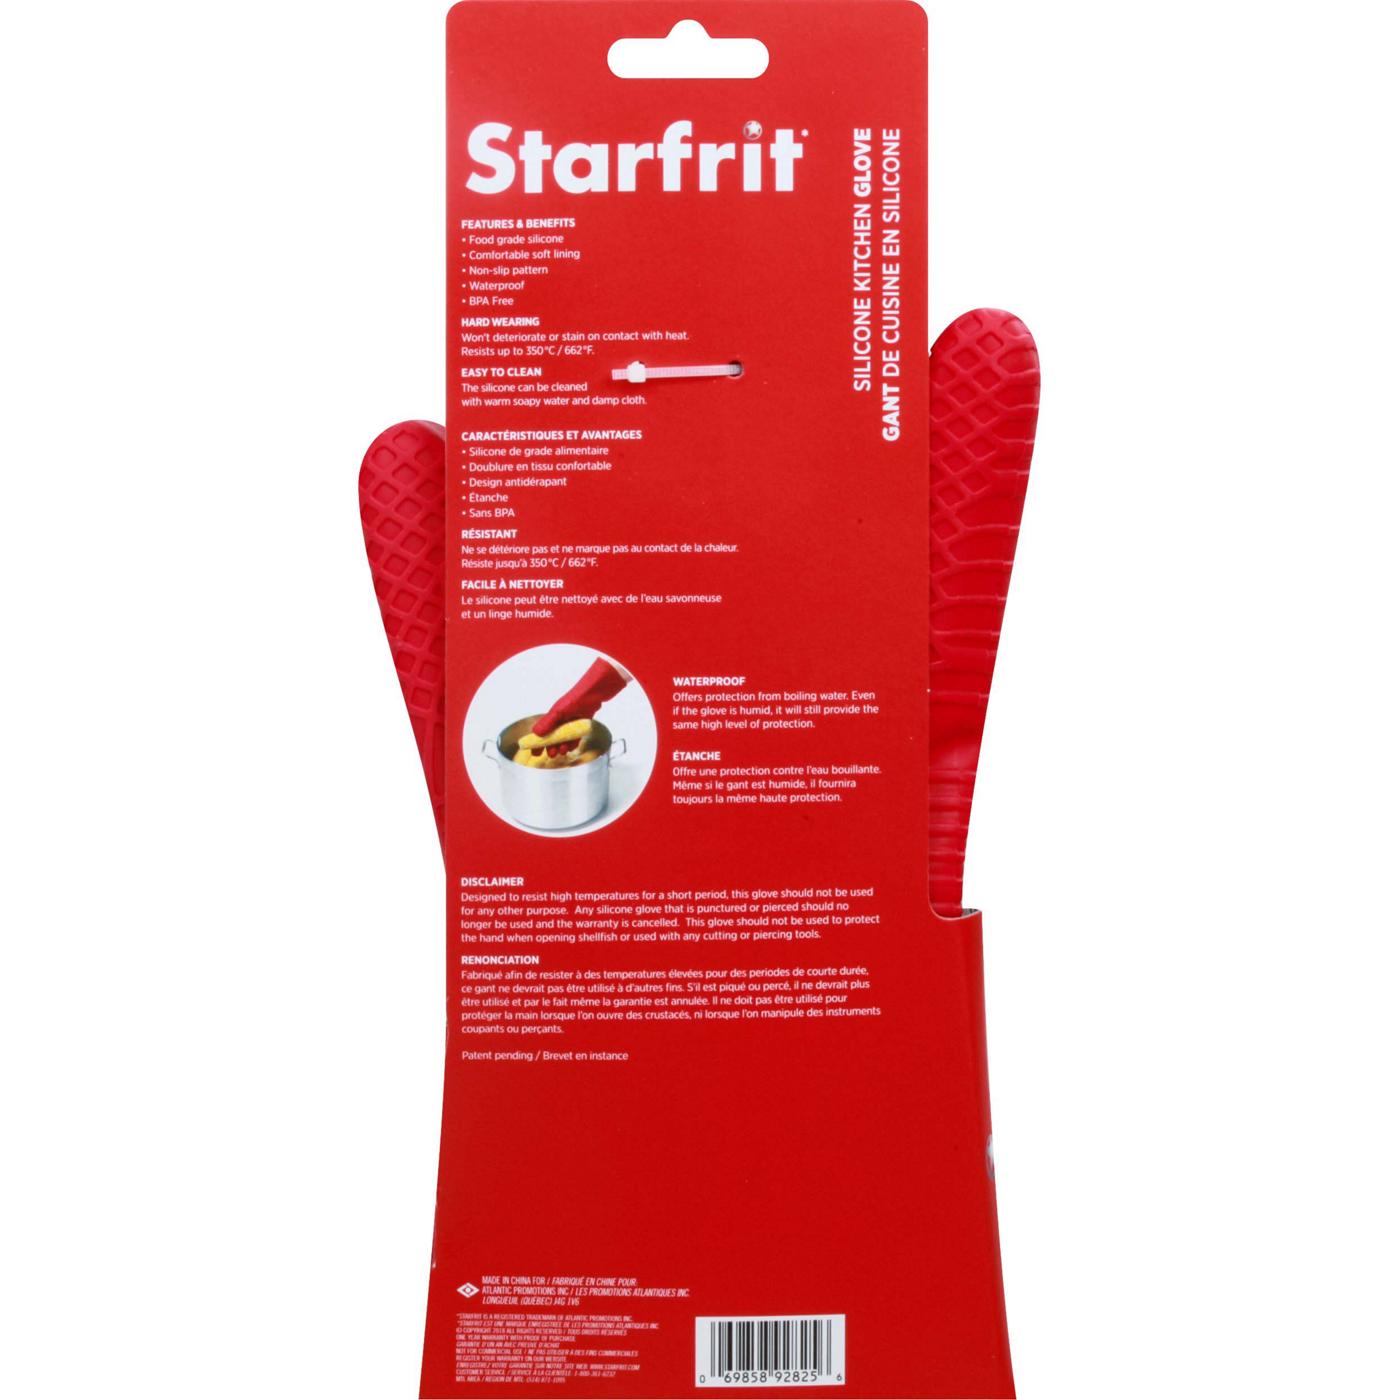 Starfrit Silicone Oven Glove; image 2 of 2